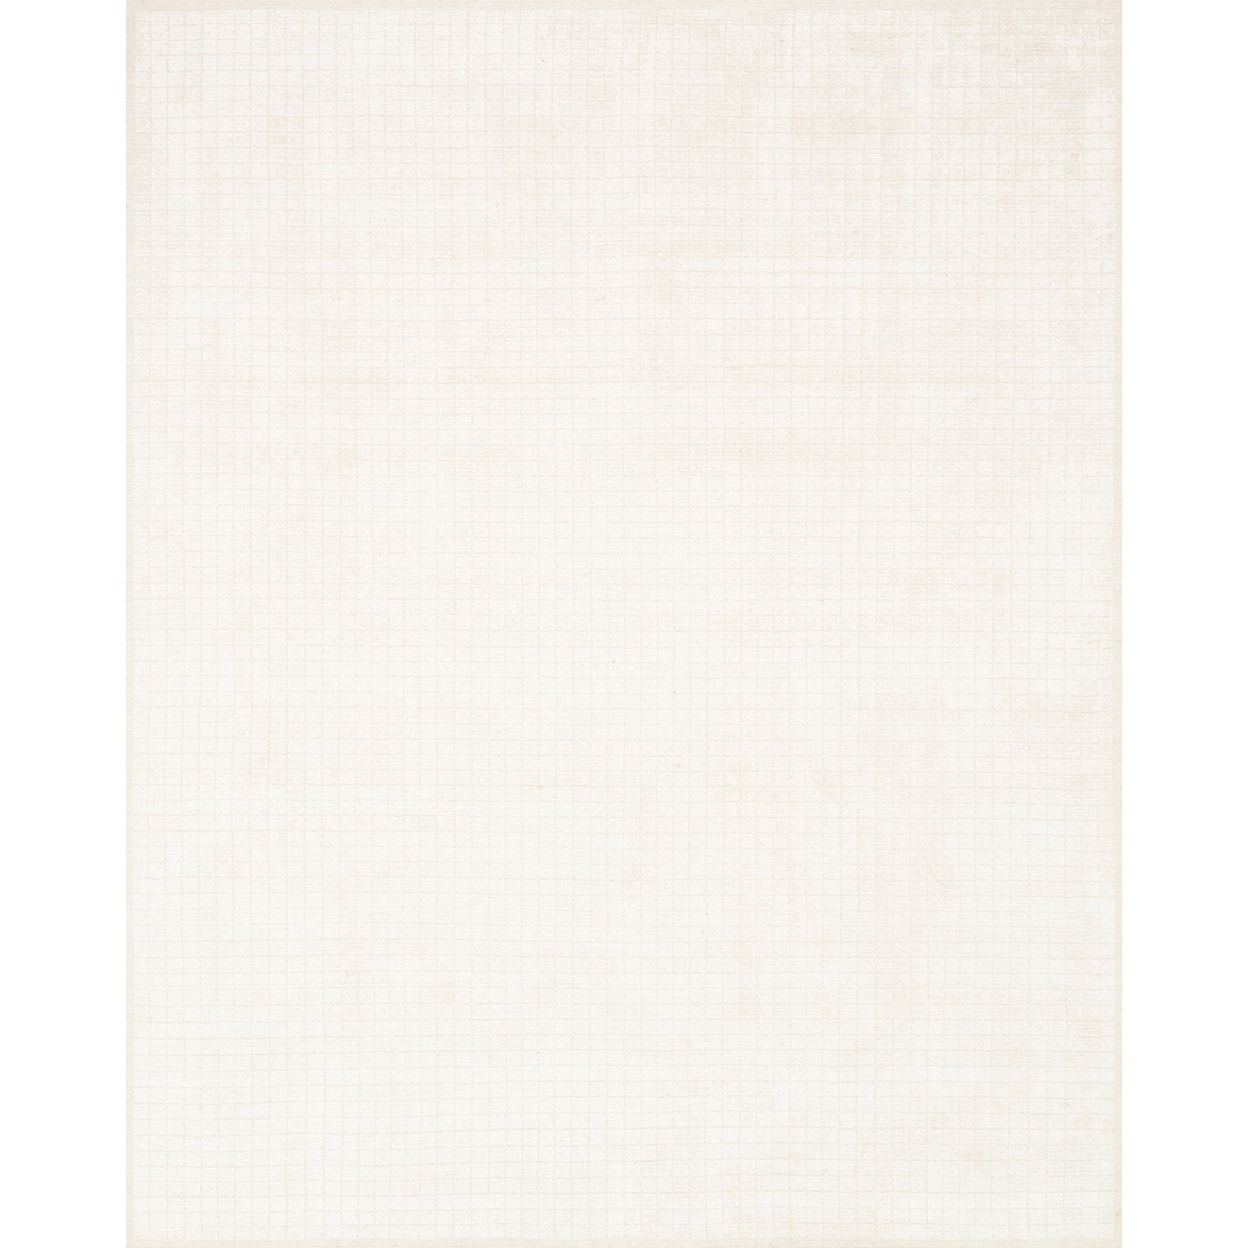 Reeds Rugs Beverly 4'0" x 6'0" Ivory Rug